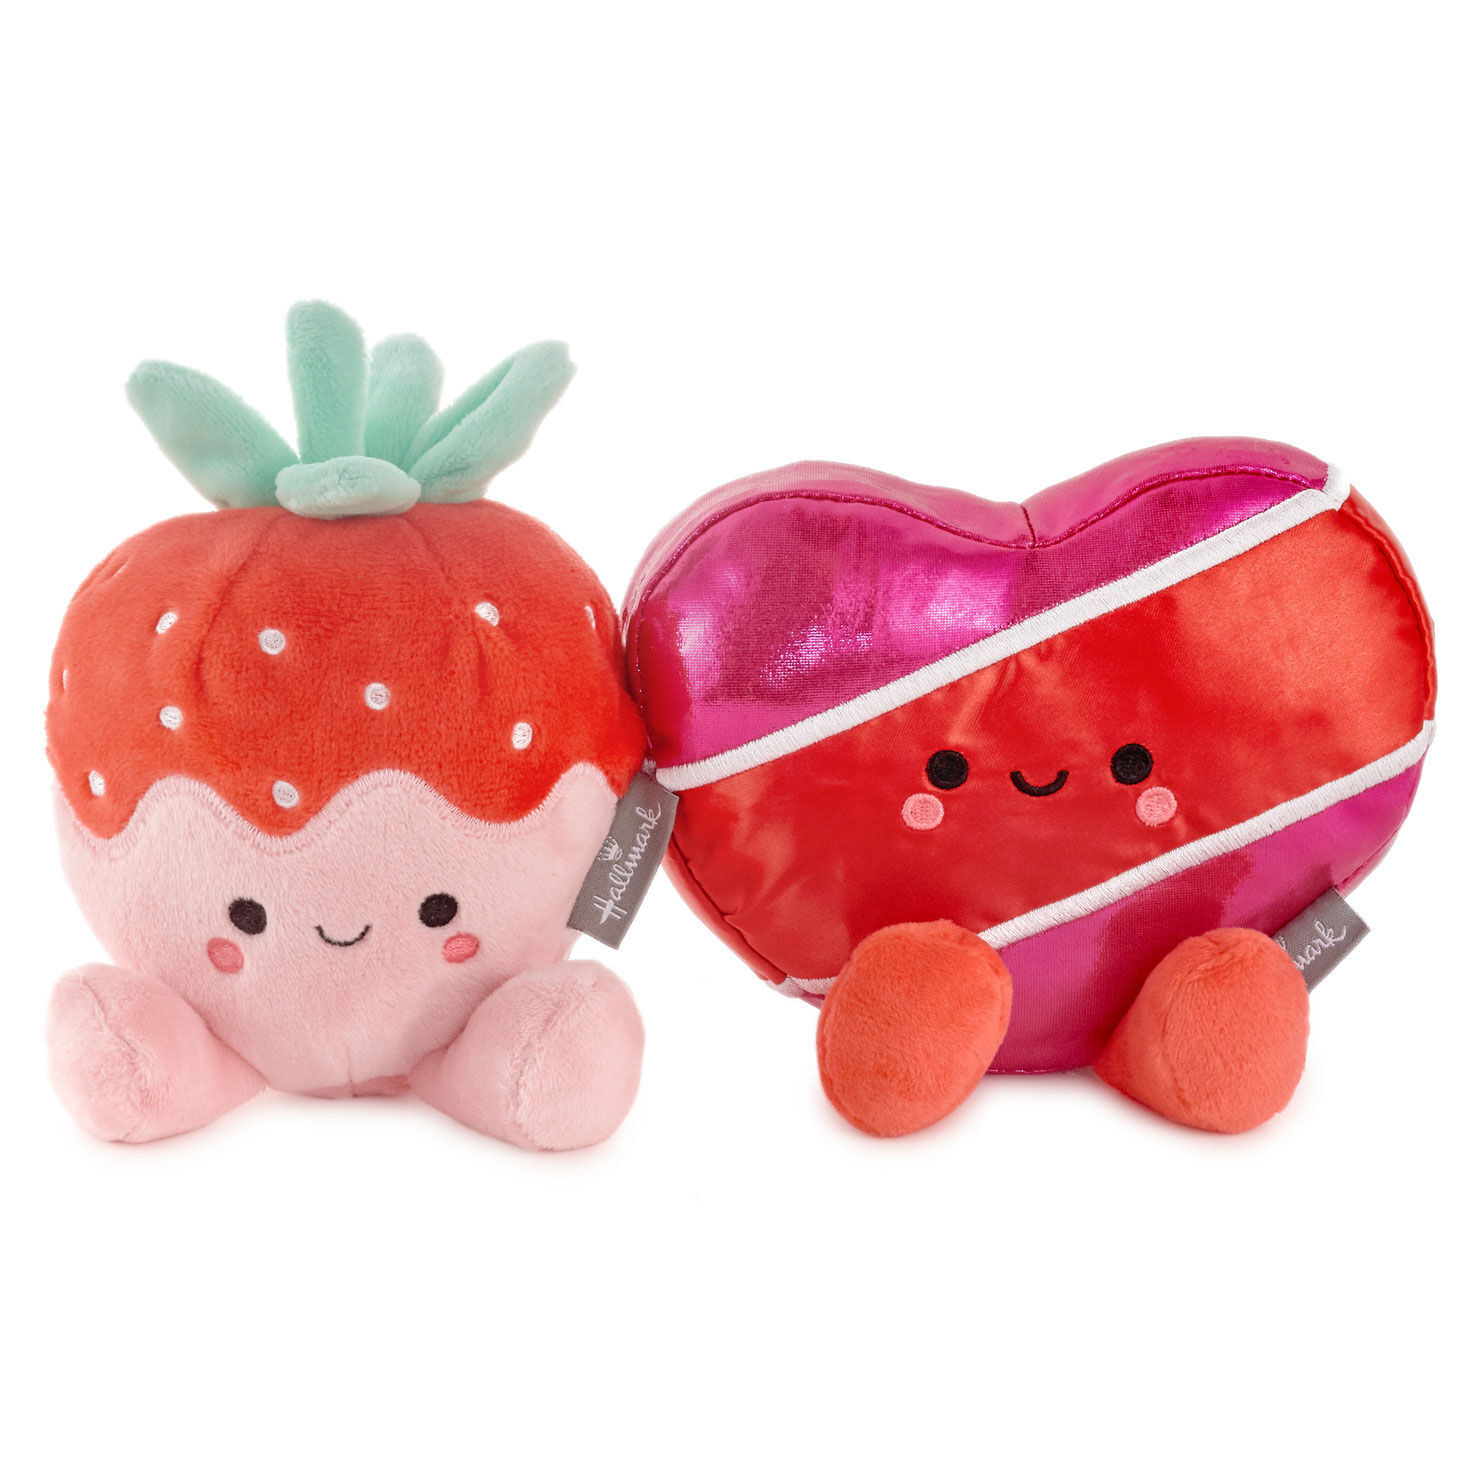 Better Together Strawberry and Chocolates Magnetic Plush Pair, 5.5"